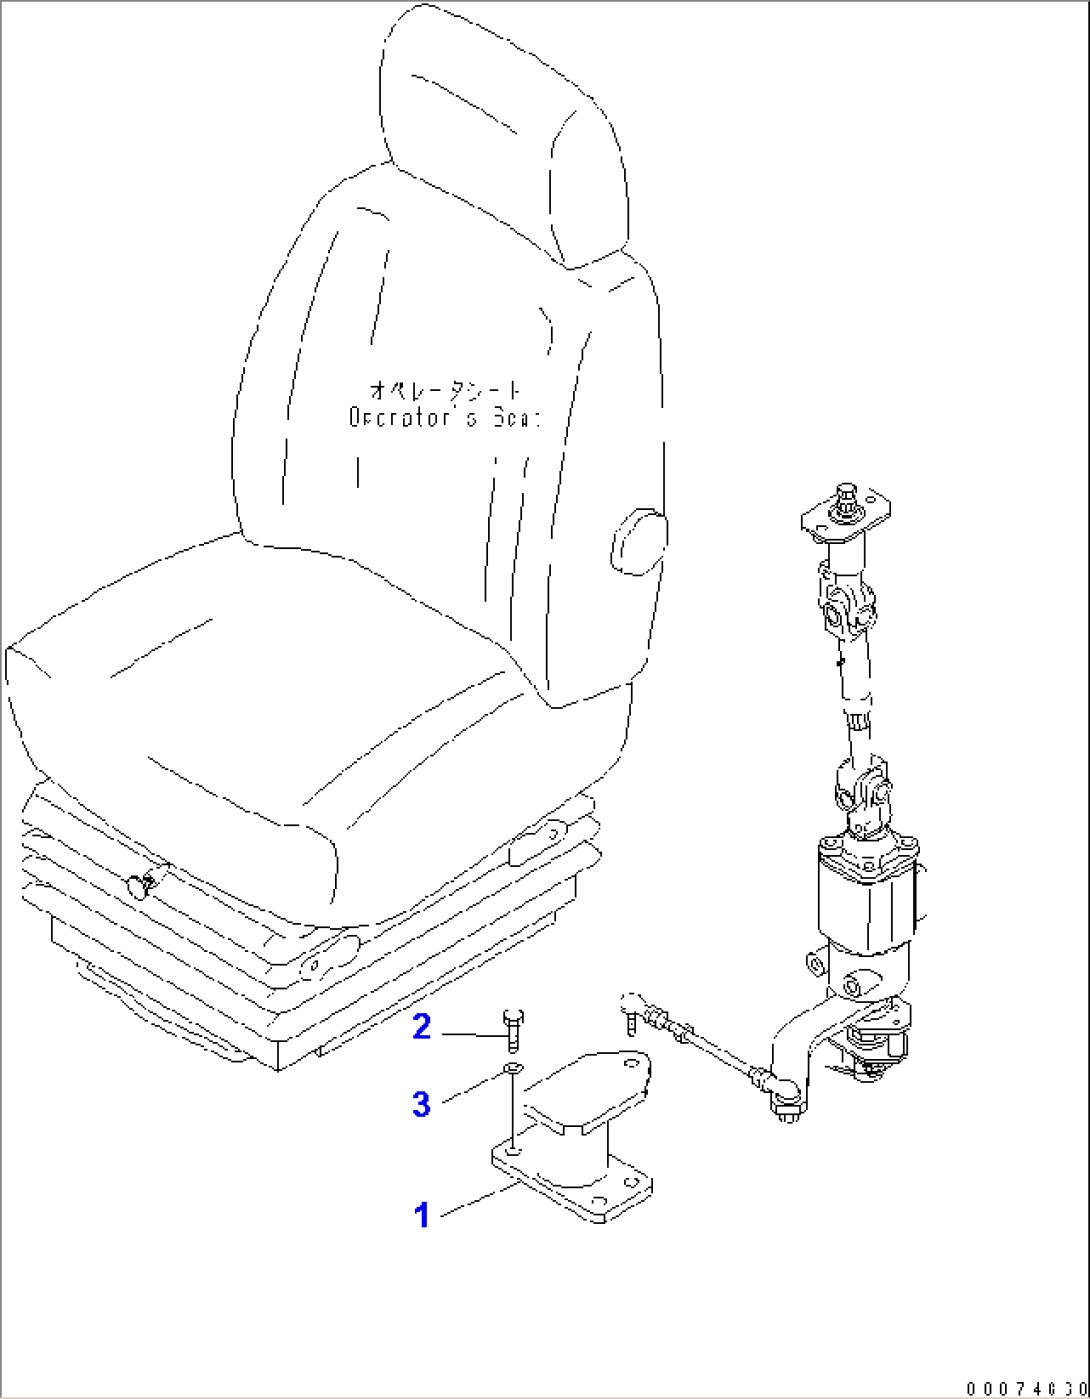 STEERING AND TRANSMISSION CONTROL (LINKAGE BRACKET) (WITH ADVANCED JOY STICK STEERING)(#51075-)